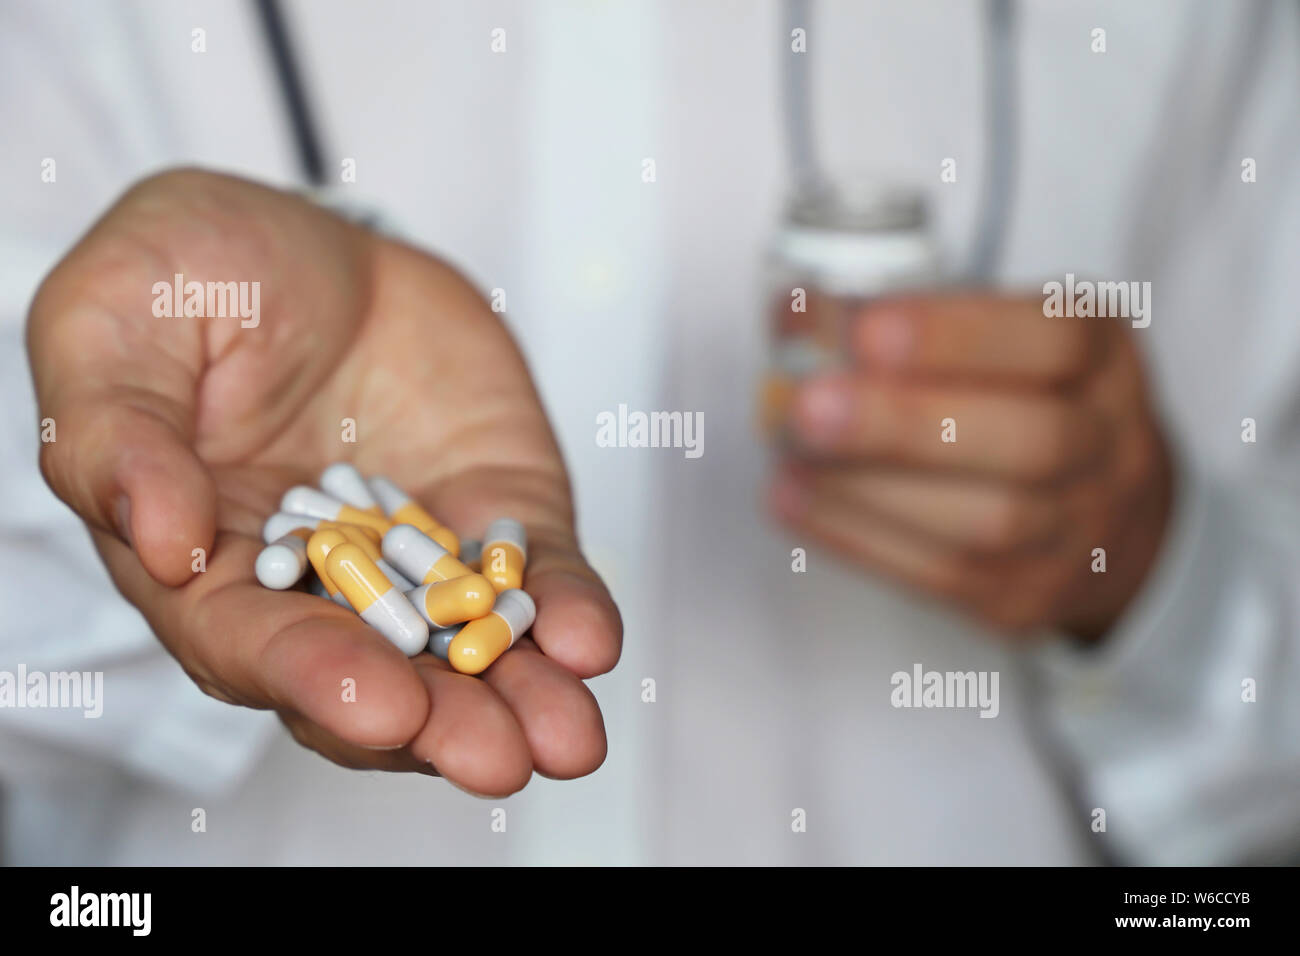 Doctor giving pills, physician holding in palm of hand medication in capsules. Concept of dose of drugs, vitamins, medical exam, pharmacy Stock Photo